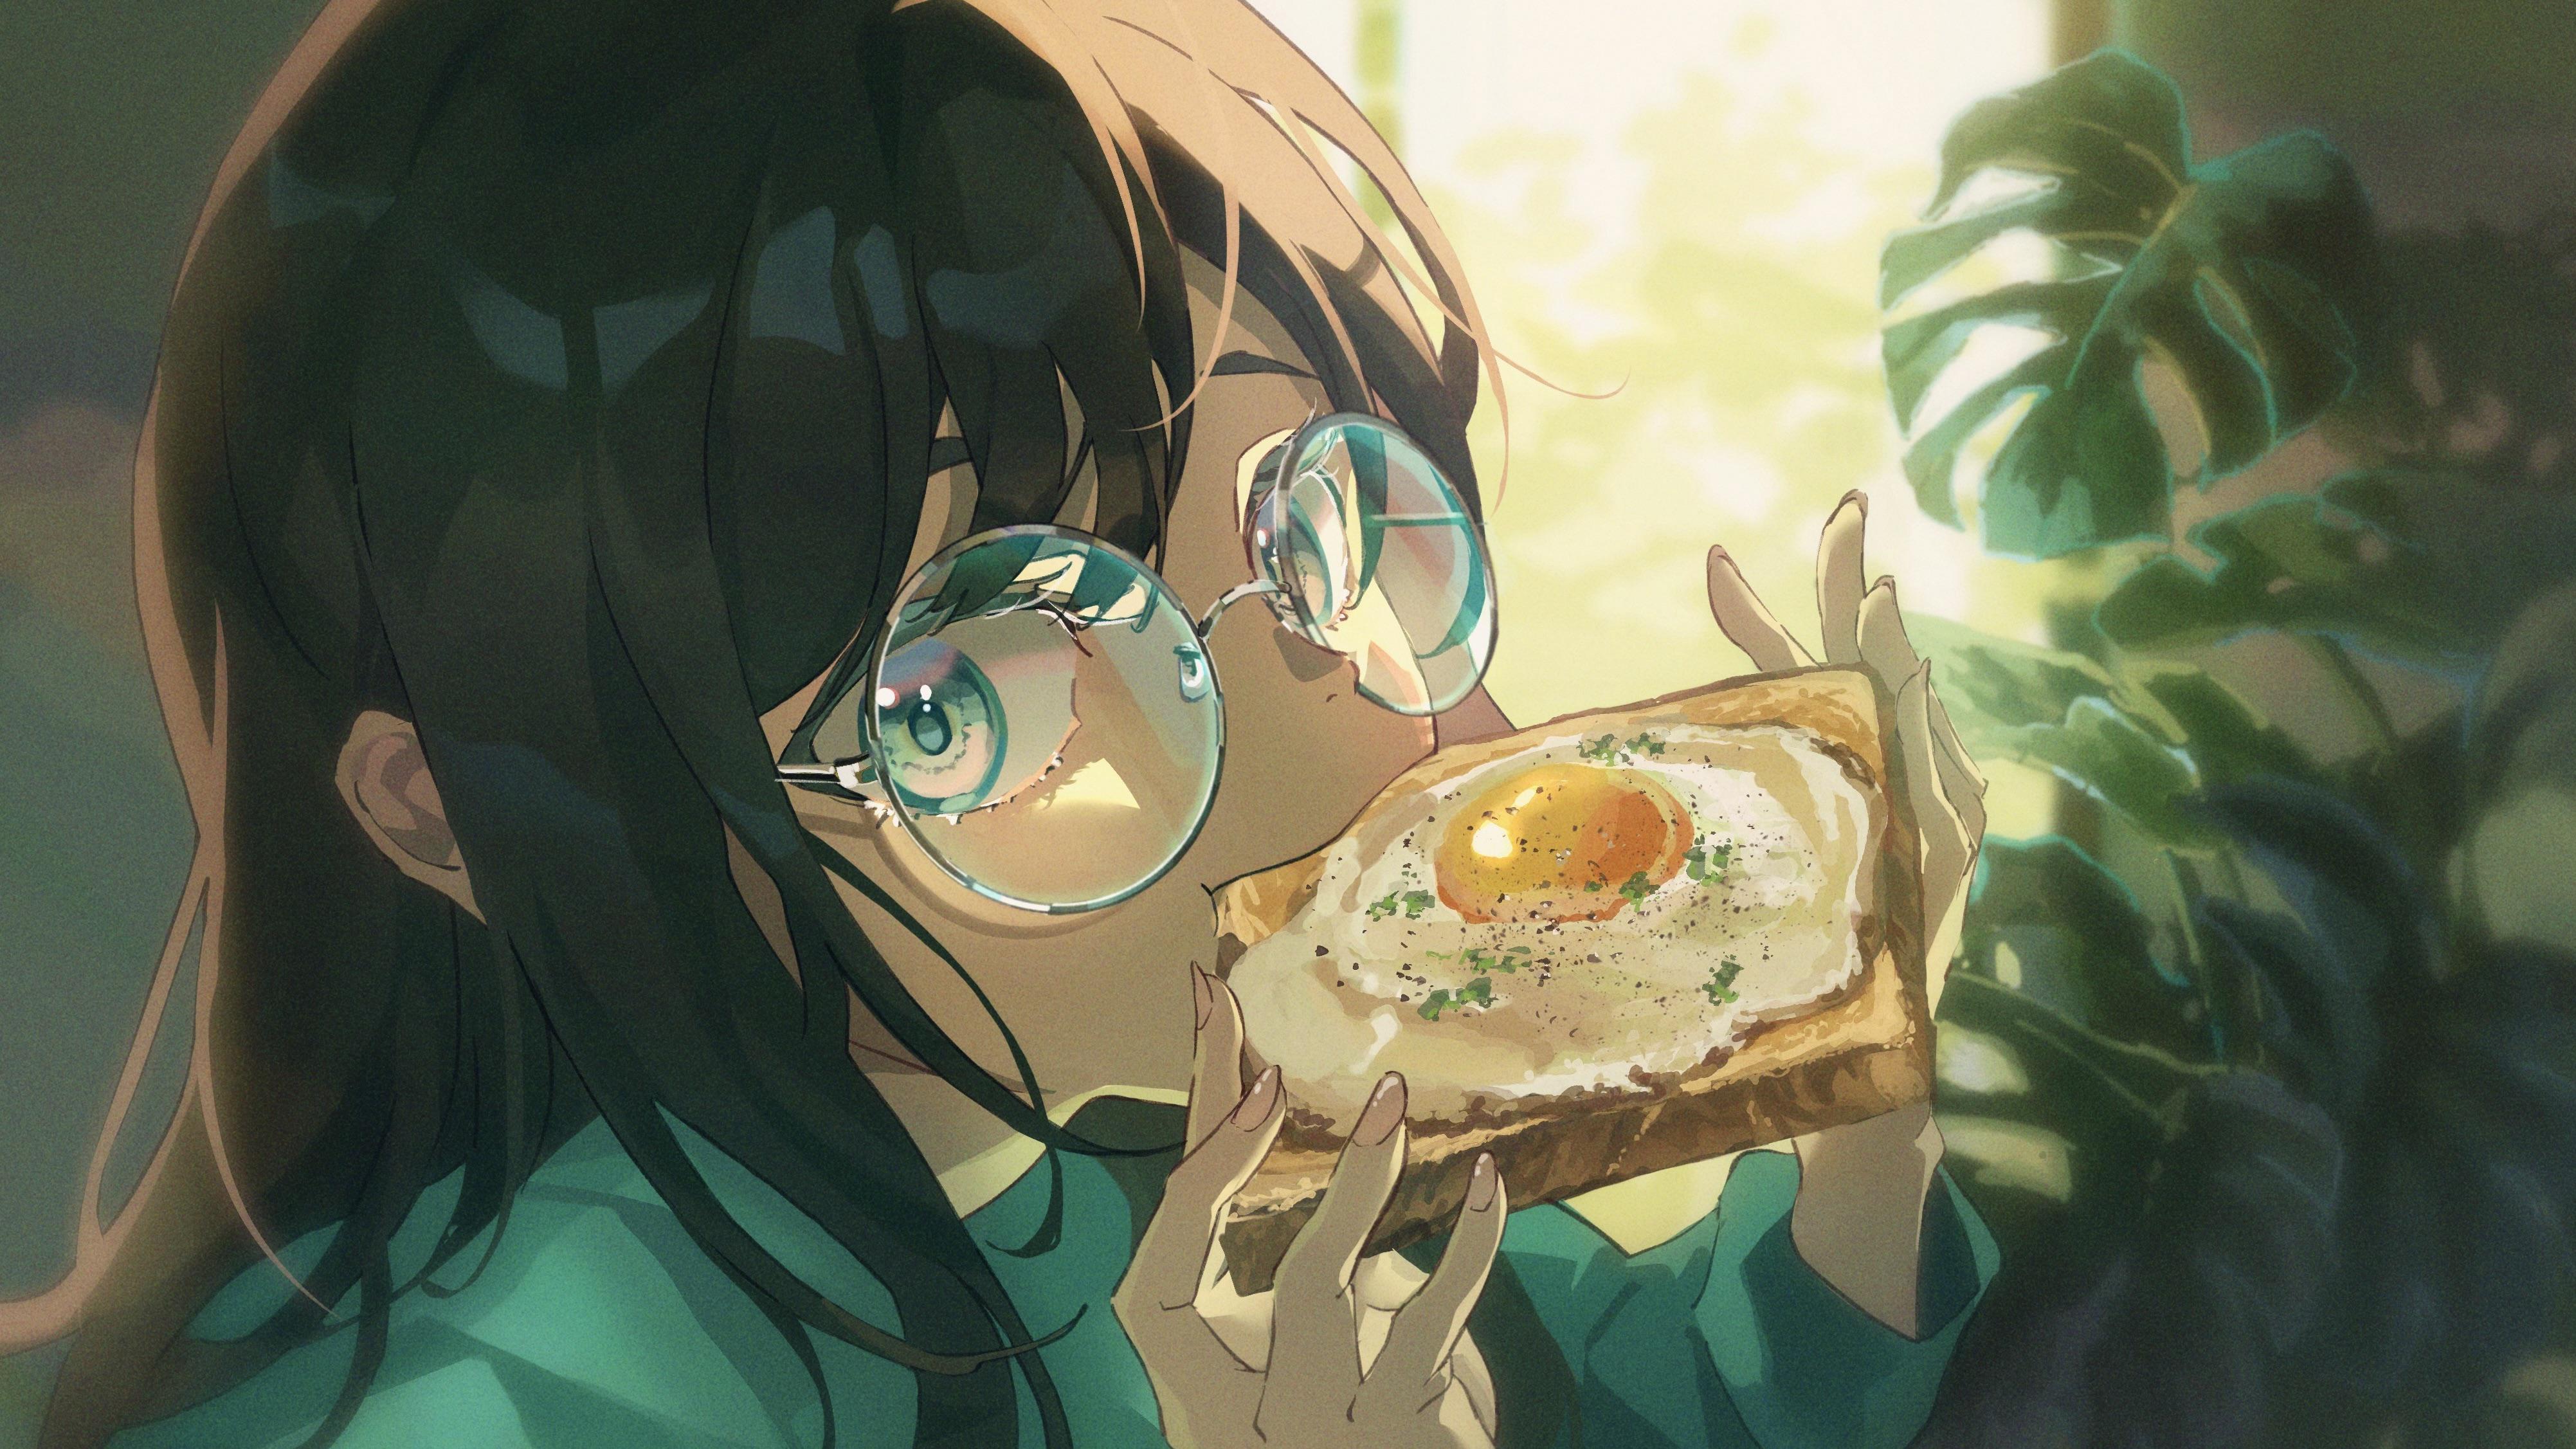 Anime Anime Girls Women With Glasses Toast Anime Girls Eating Eating Eggs Glasses Plants Blue Eyes 4006x2253